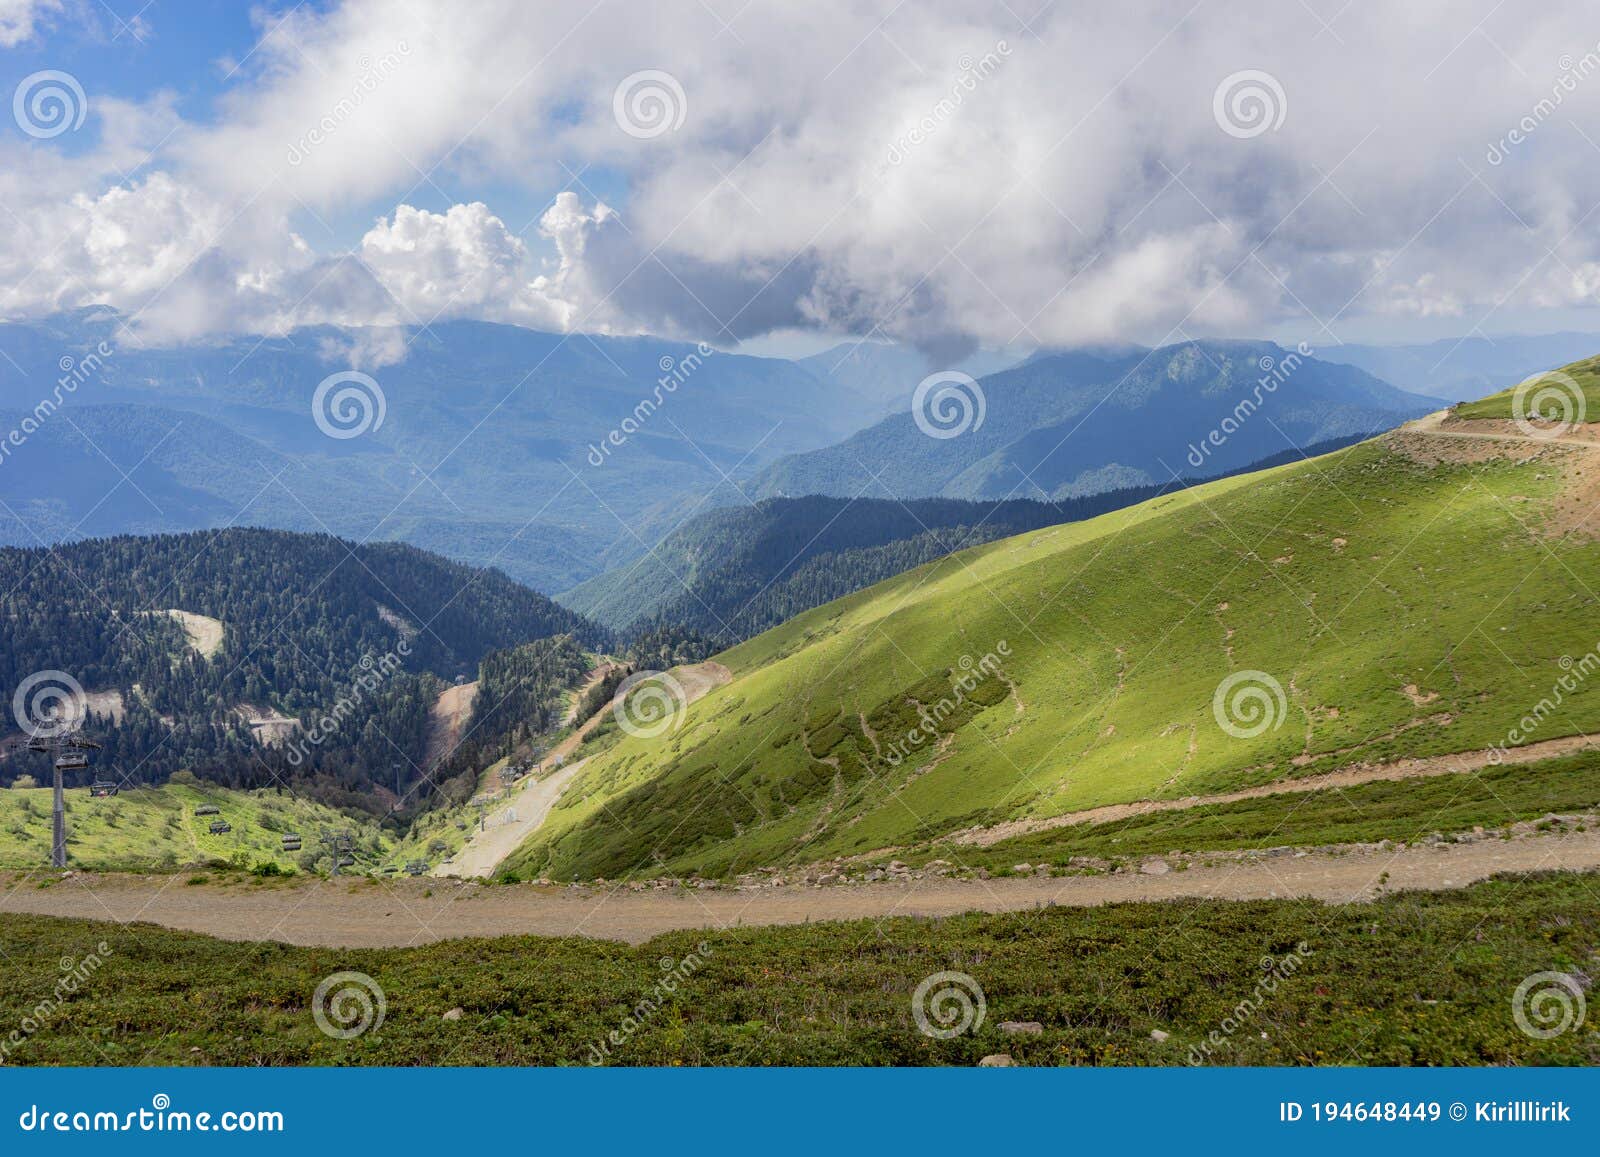 Wonderful Landscape in Mountains. Grassy Field and Rolling Hills. Rural